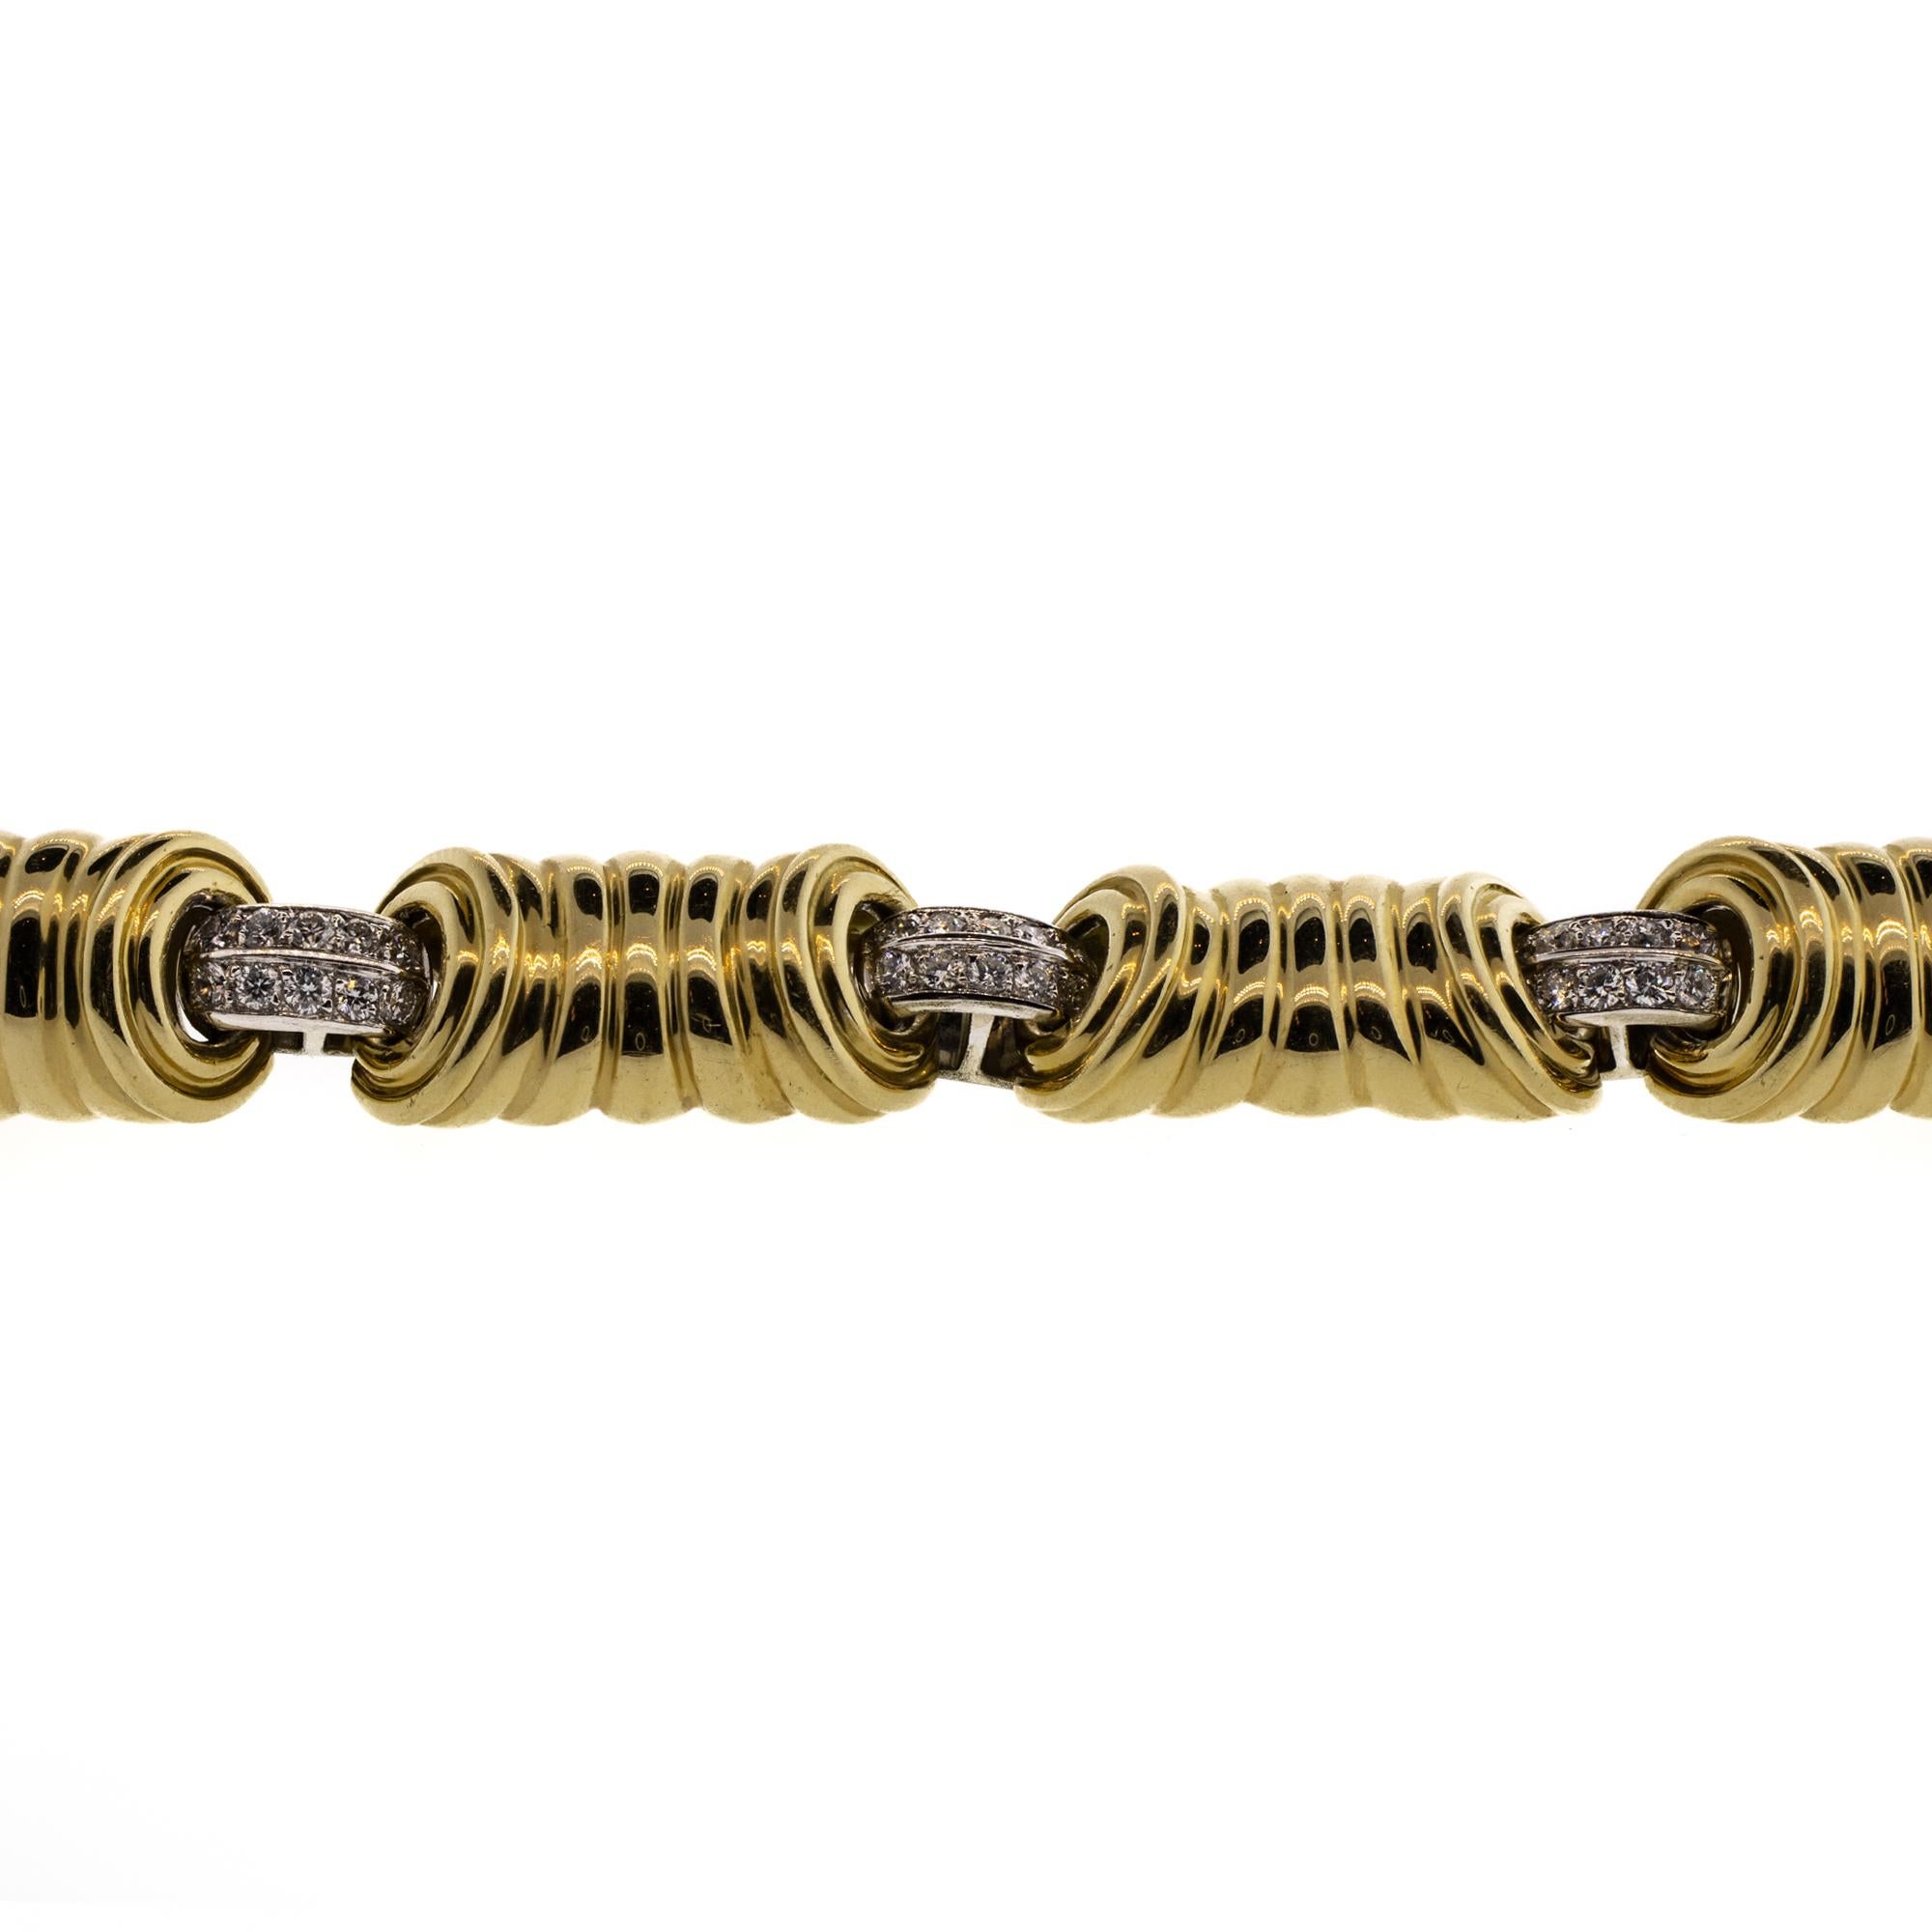 This is a stunning custom designed weighty addition to anyone's collection. Made from solid 18k gold, these seven slightly concave corrugated yellow gold links are separated by contrasting diamond studded white gold links. There are approximately